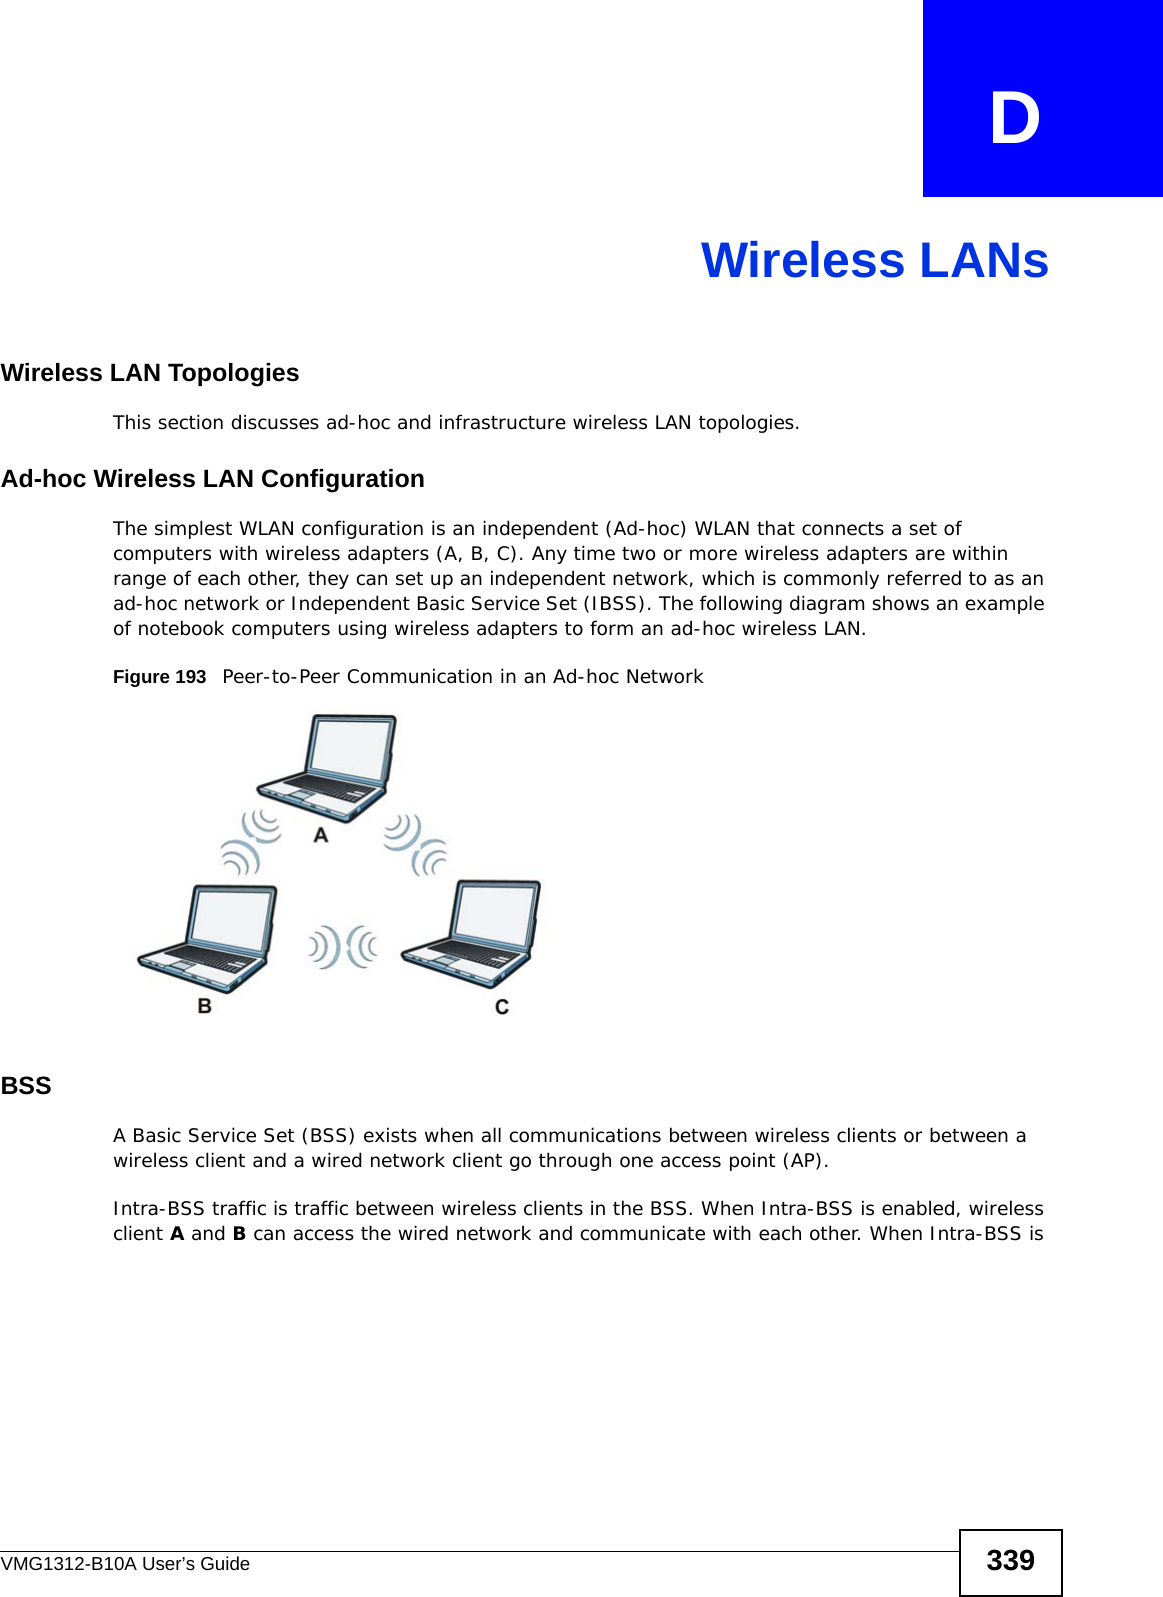 VMG1312-B10A User’s Guide 339APPENDIX   DWireless LANsWireless LAN TopologiesThis section discusses ad-hoc and infrastructure wireless LAN topologies.Ad-hoc Wireless LAN ConfigurationThe simplest WLAN configuration is an independent (Ad-hoc) WLAN that connects a set of computers with wireless adapters (A, B, C). Any time two or more wireless adapters are within range of each other, they can set up an independent network, which is commonly referred to as an ad-hoc network or Independent Basic Service Set (IBSS). The following diagram shows an example of notebook computers using wireless adapters to form an ad-hoc wireless LAN. Figure 193   Peer-to-Peer Communication in an Ad-hoc NetworkBSSA Basic Service Set (BSS) exists when all communications between wireless clients or between a wireless client and a wired network client go through one access point (AP). Intra-BSS traffic is traffic between wireless clients in the BSS. When Intra-BSS is enabled, wireless client A and B can access the wired network and communicate with each other. When Intra-BSS is 